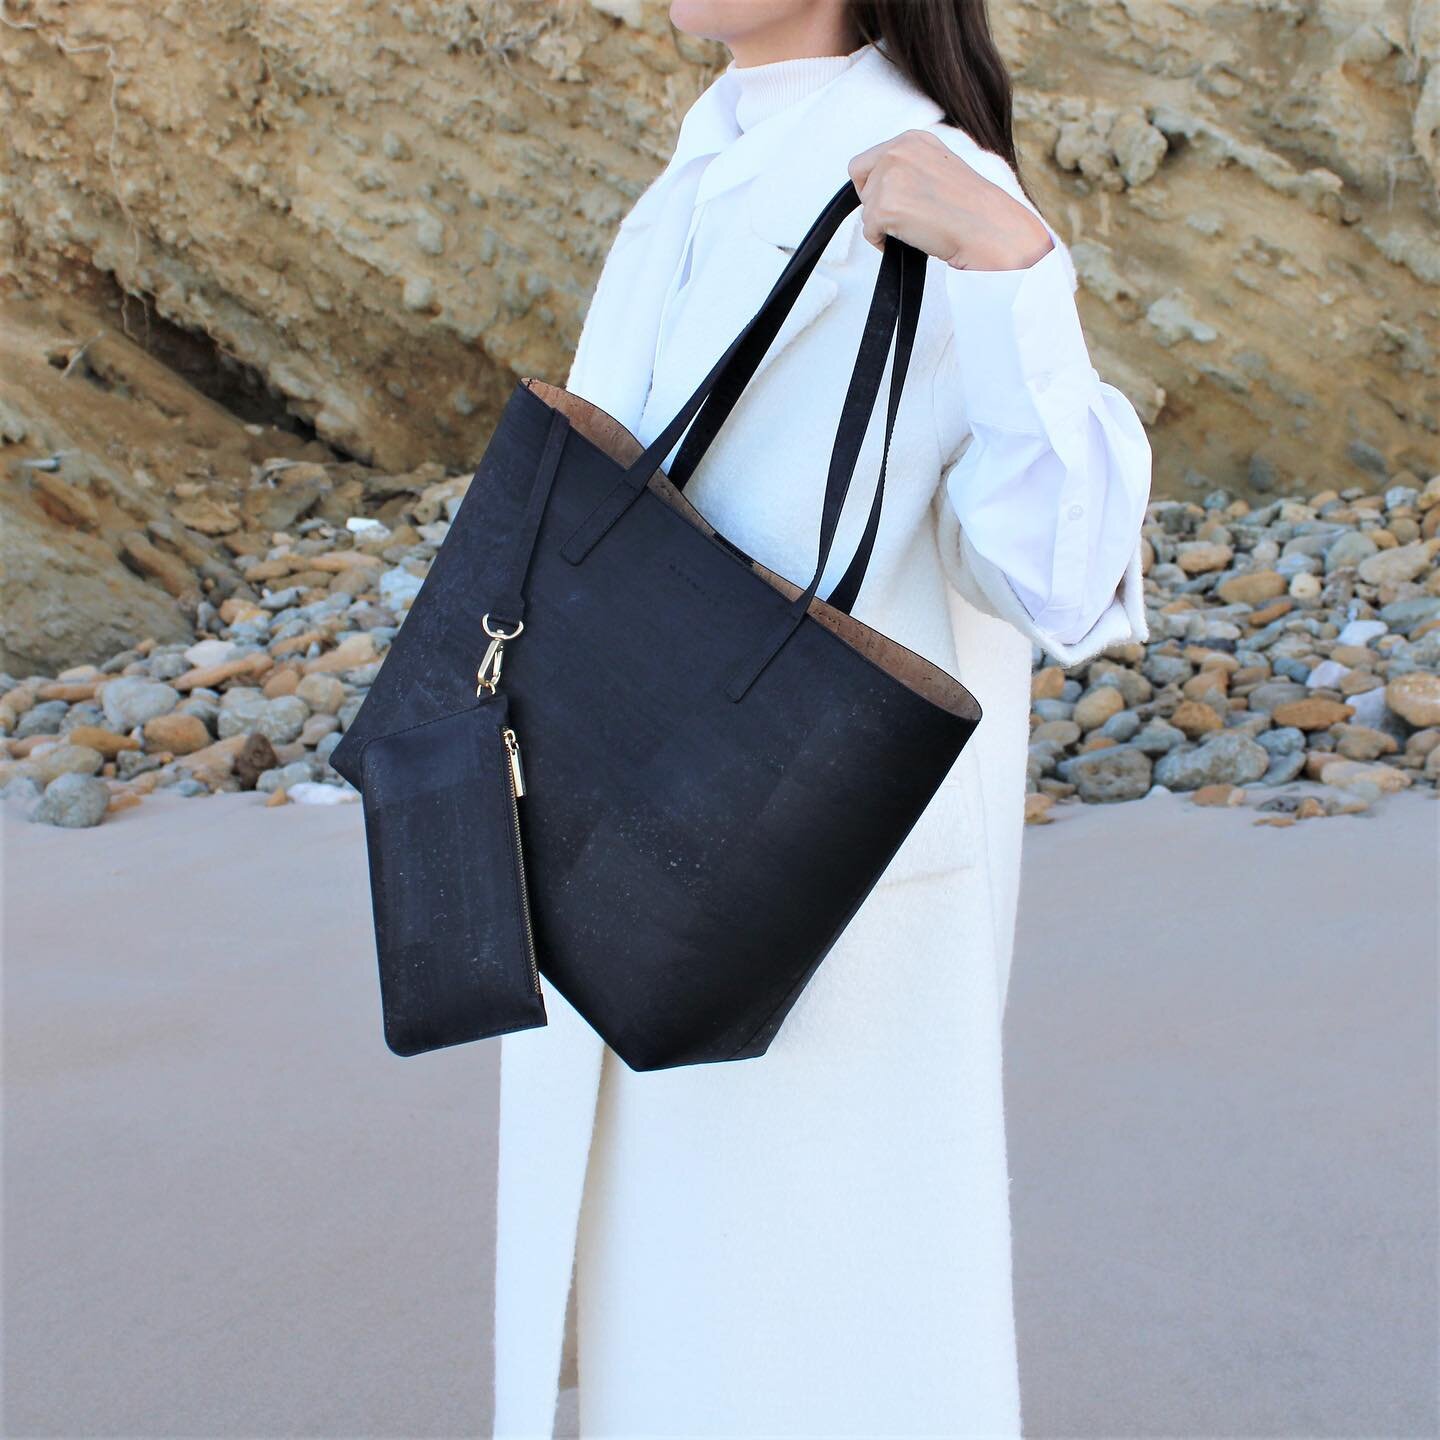 Discover our new ZETA TOTE BAG in black color luxuriously handcrafted in the EU with low-impact, vegan materials.  Beautifully contrasted colors of soft cork fabric from outside and inside.PETA-Approved Vegan. 

#fairtradeproducts 

&bull; Link to Na